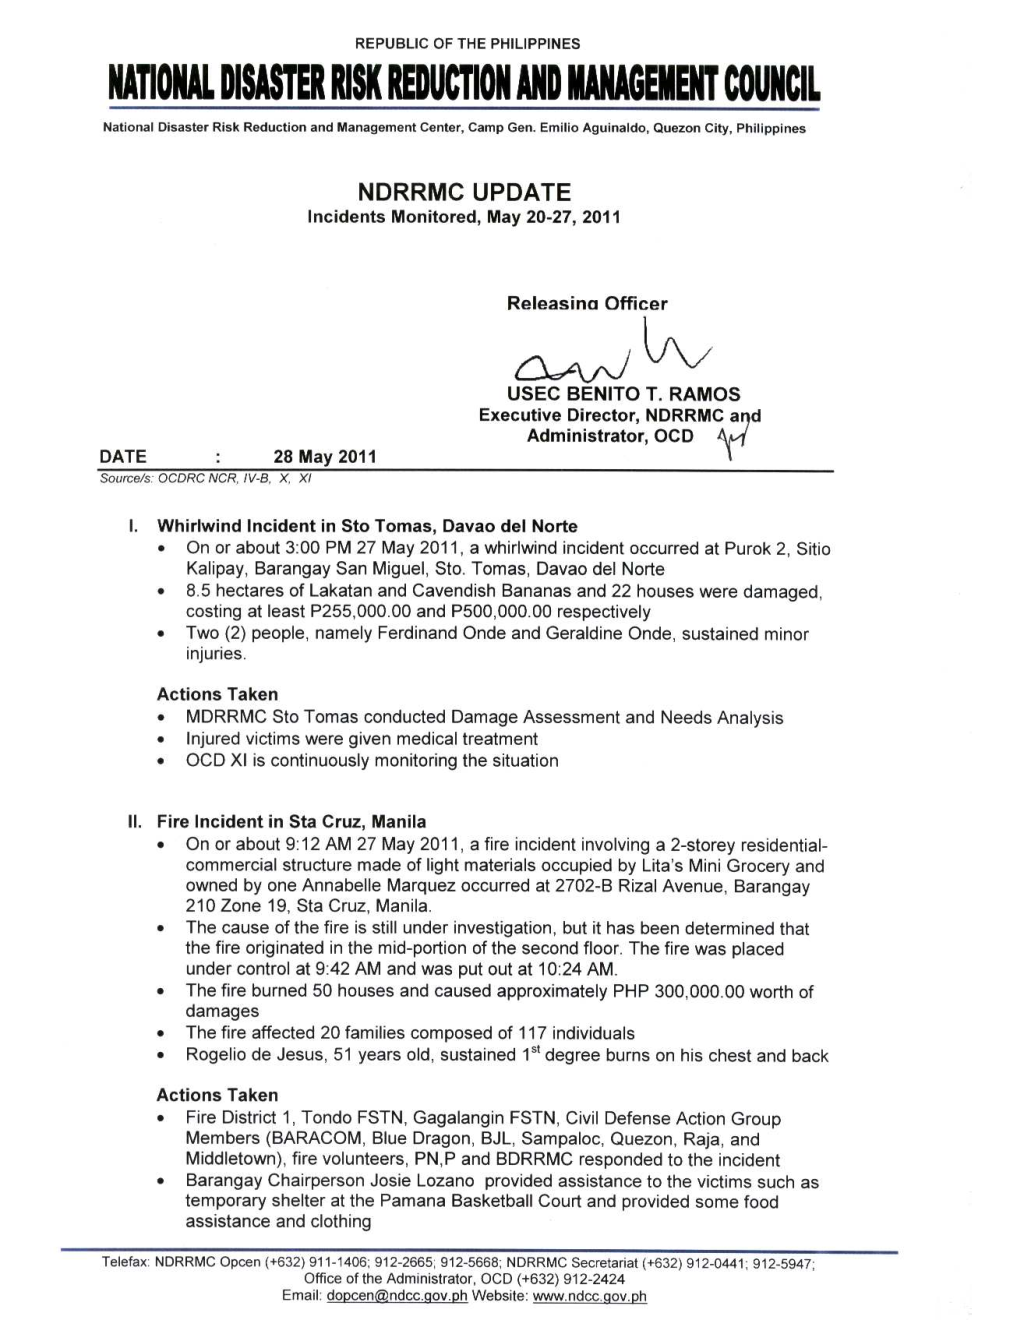 NDRRMC Update Re Incidents Monitored 27May 11